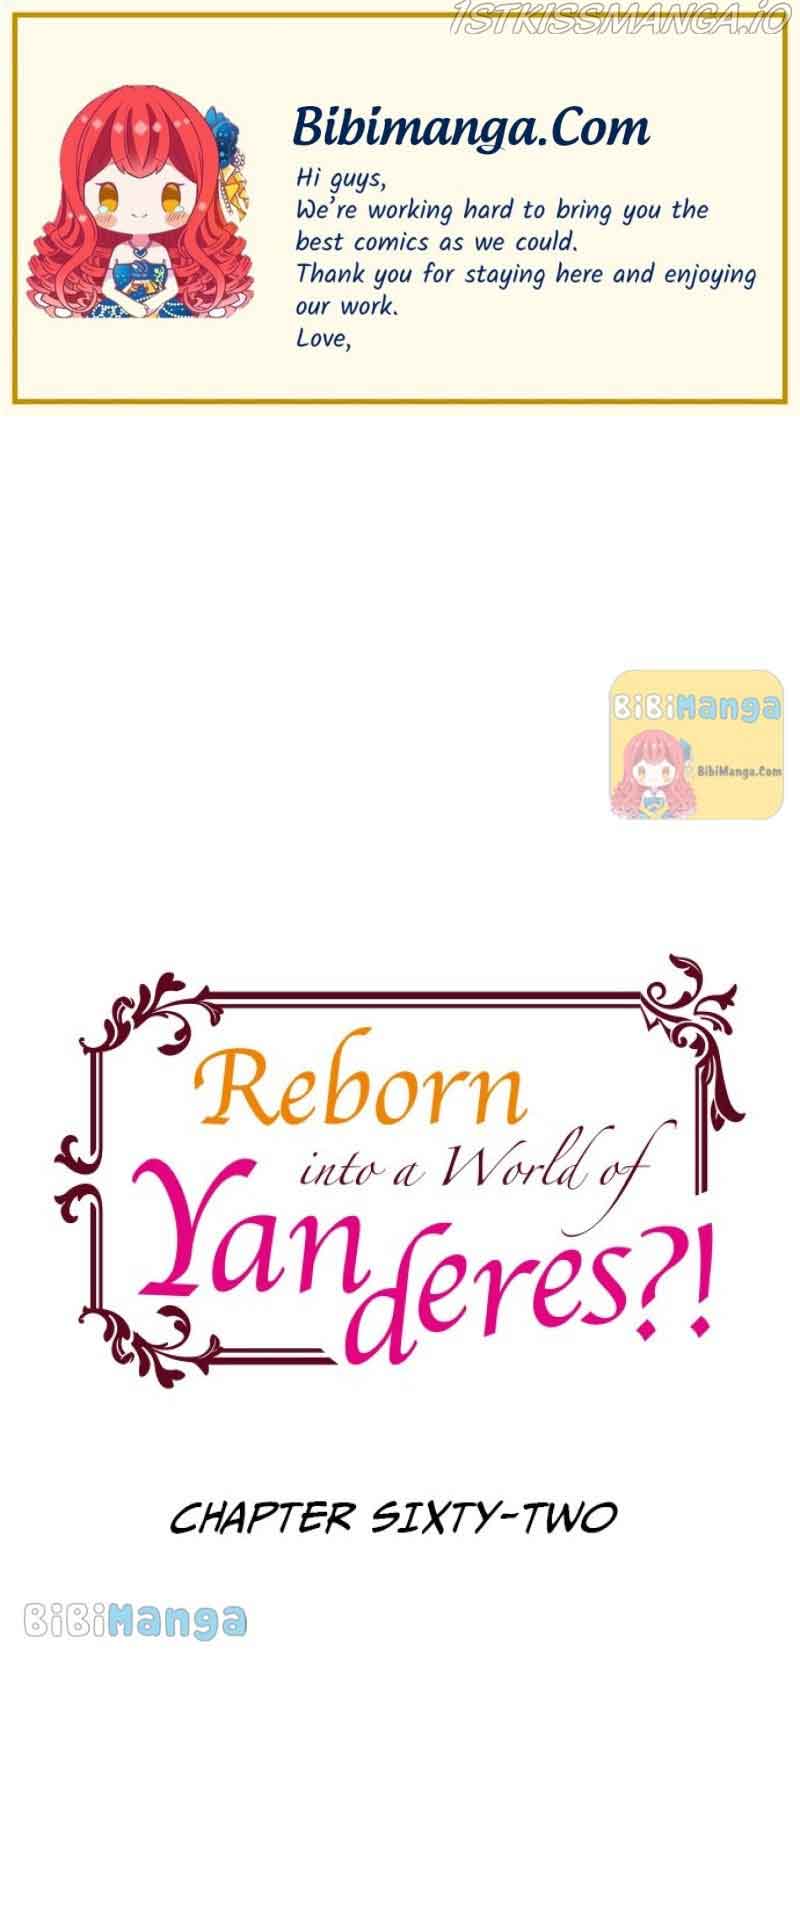 Reborn into a World of Yanderes?! chapter 62